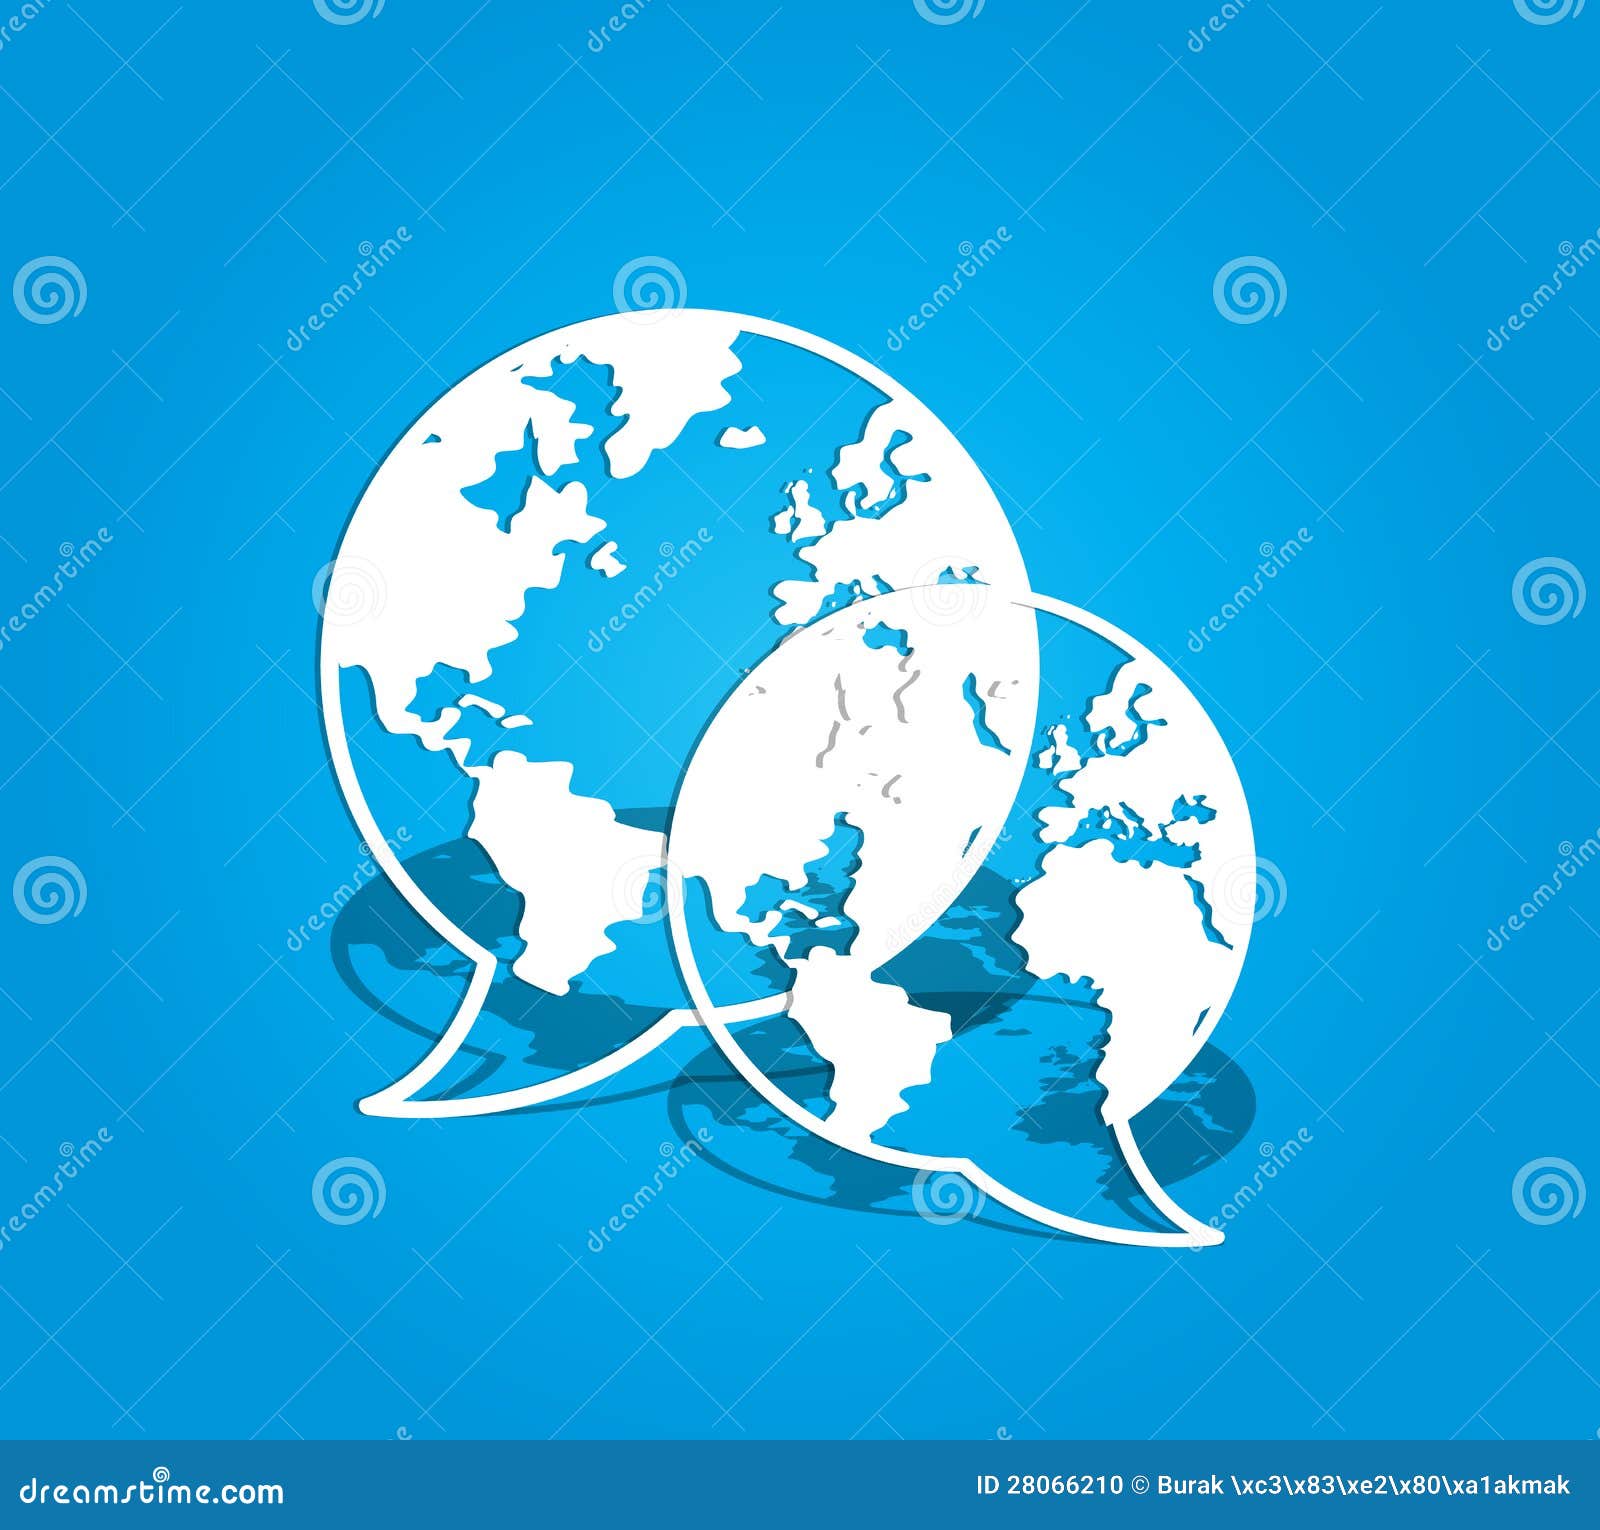 Global Social Communication Horizontal Banner With Colorful Network ...